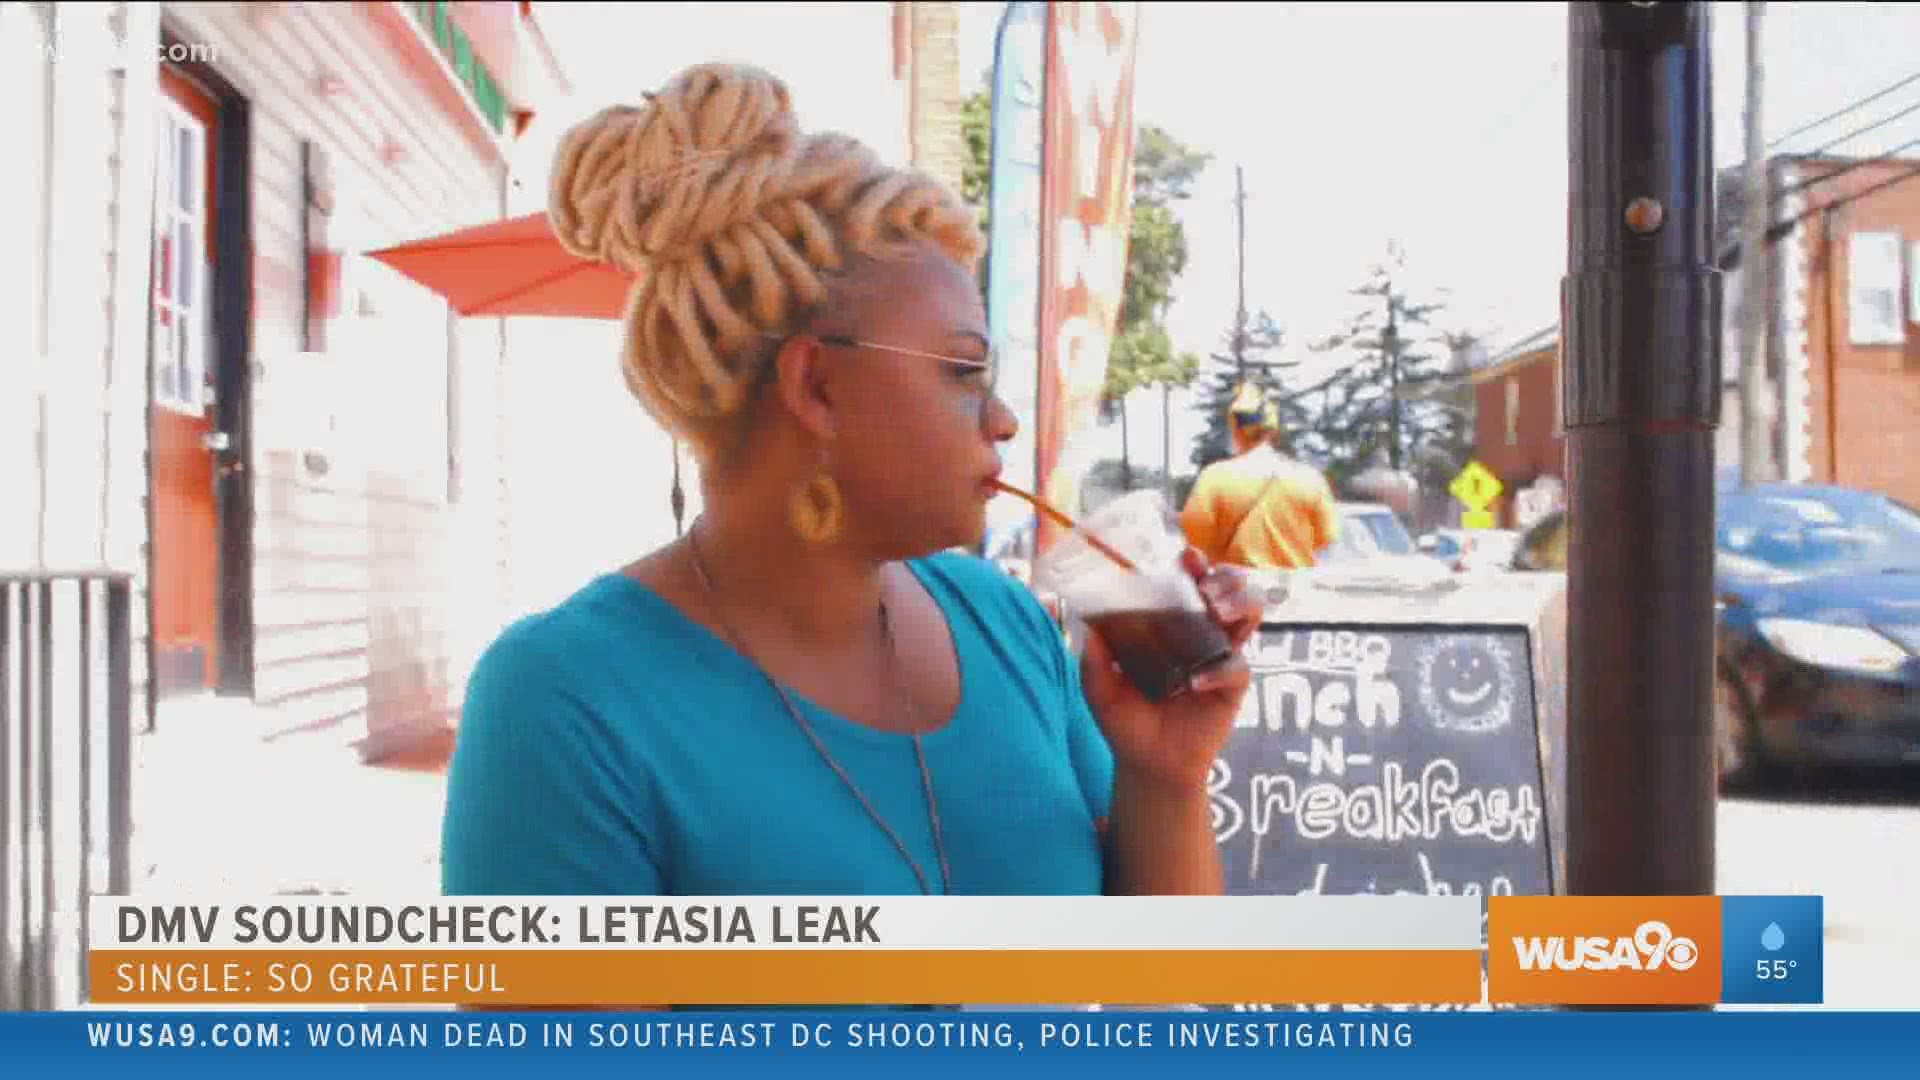 Letasia Leak performs her single "Grateful." To submit your song for consideration email DMVSoundcheck@wusa9.com.